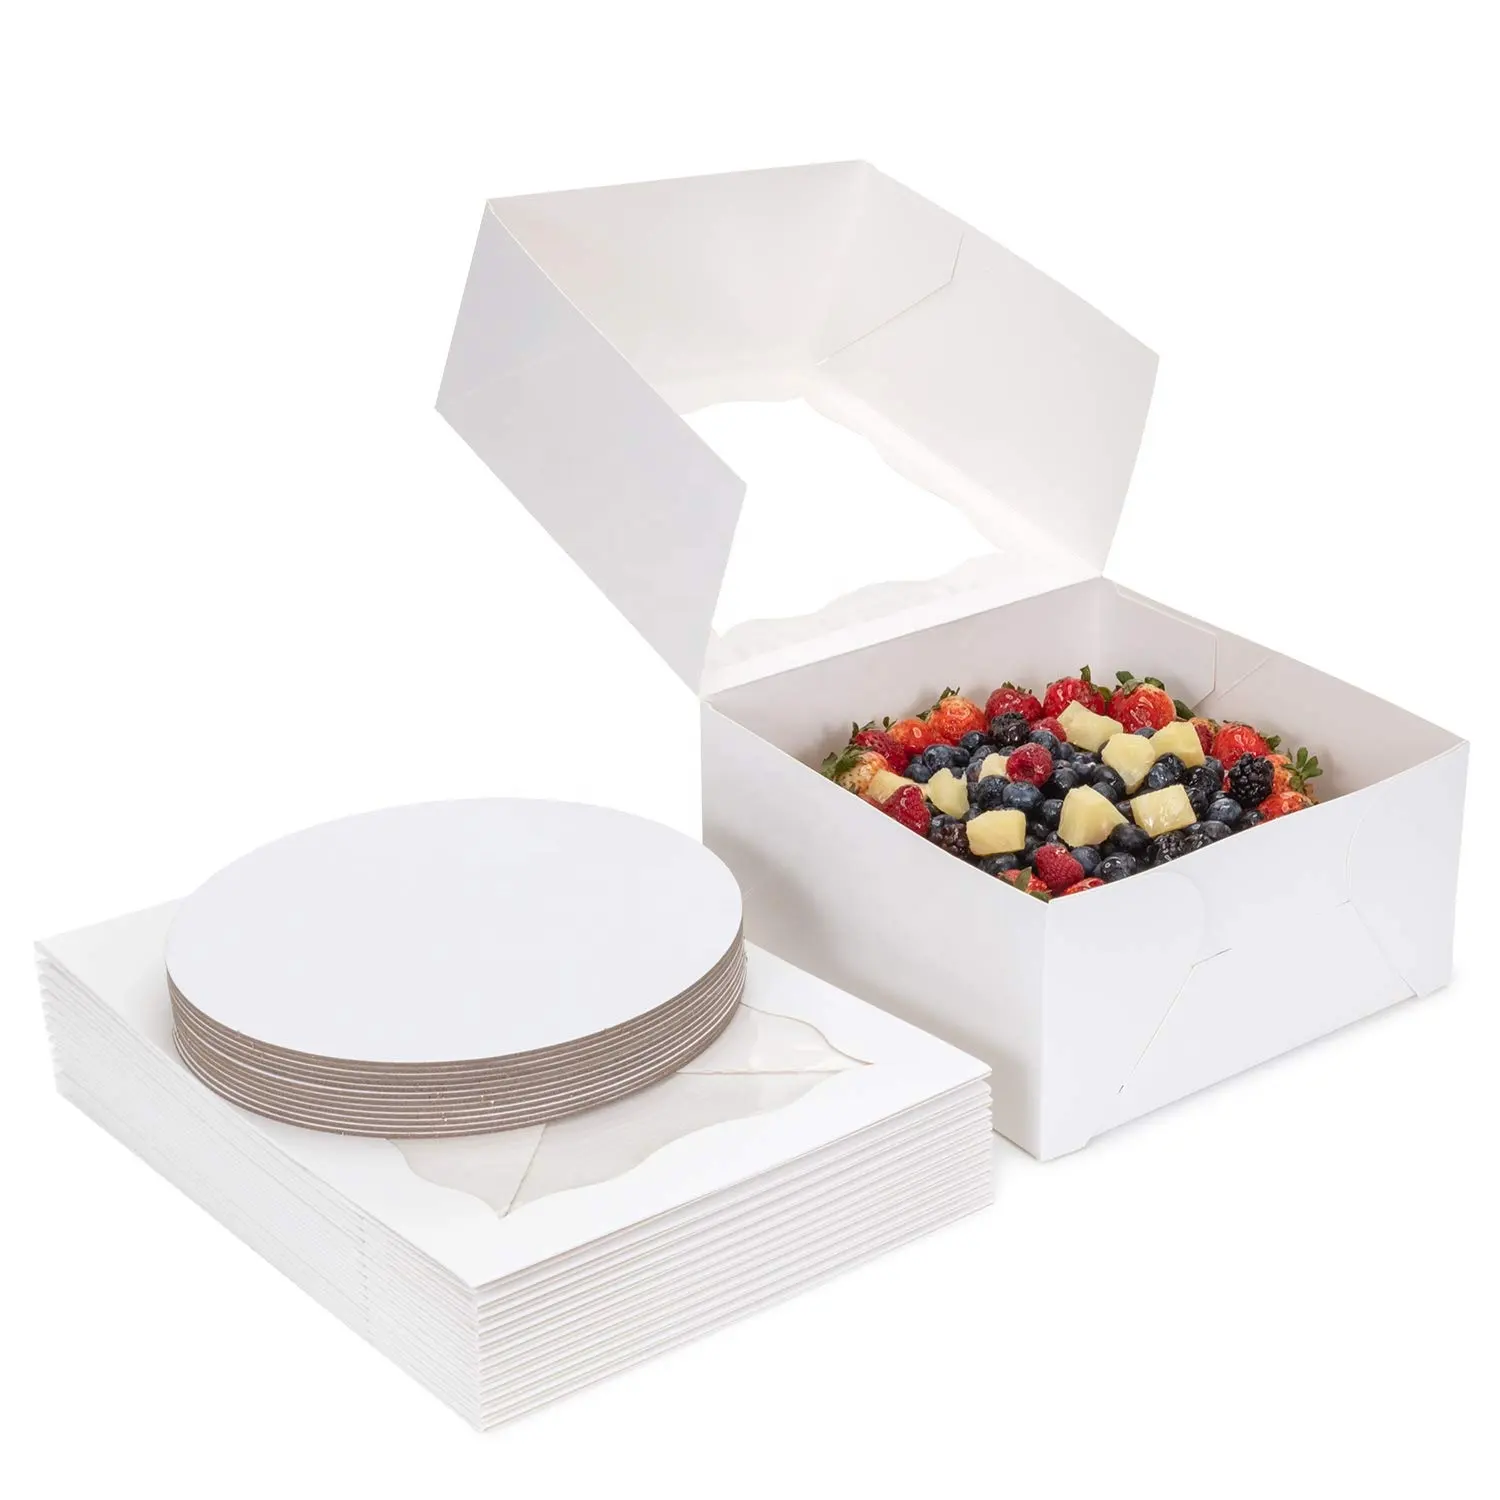 Anteng Custom Supplier POPUP Design 10Pack Cake Bakery boxes with Window and Round Gold Cake Boards 10 inch Cake boxes